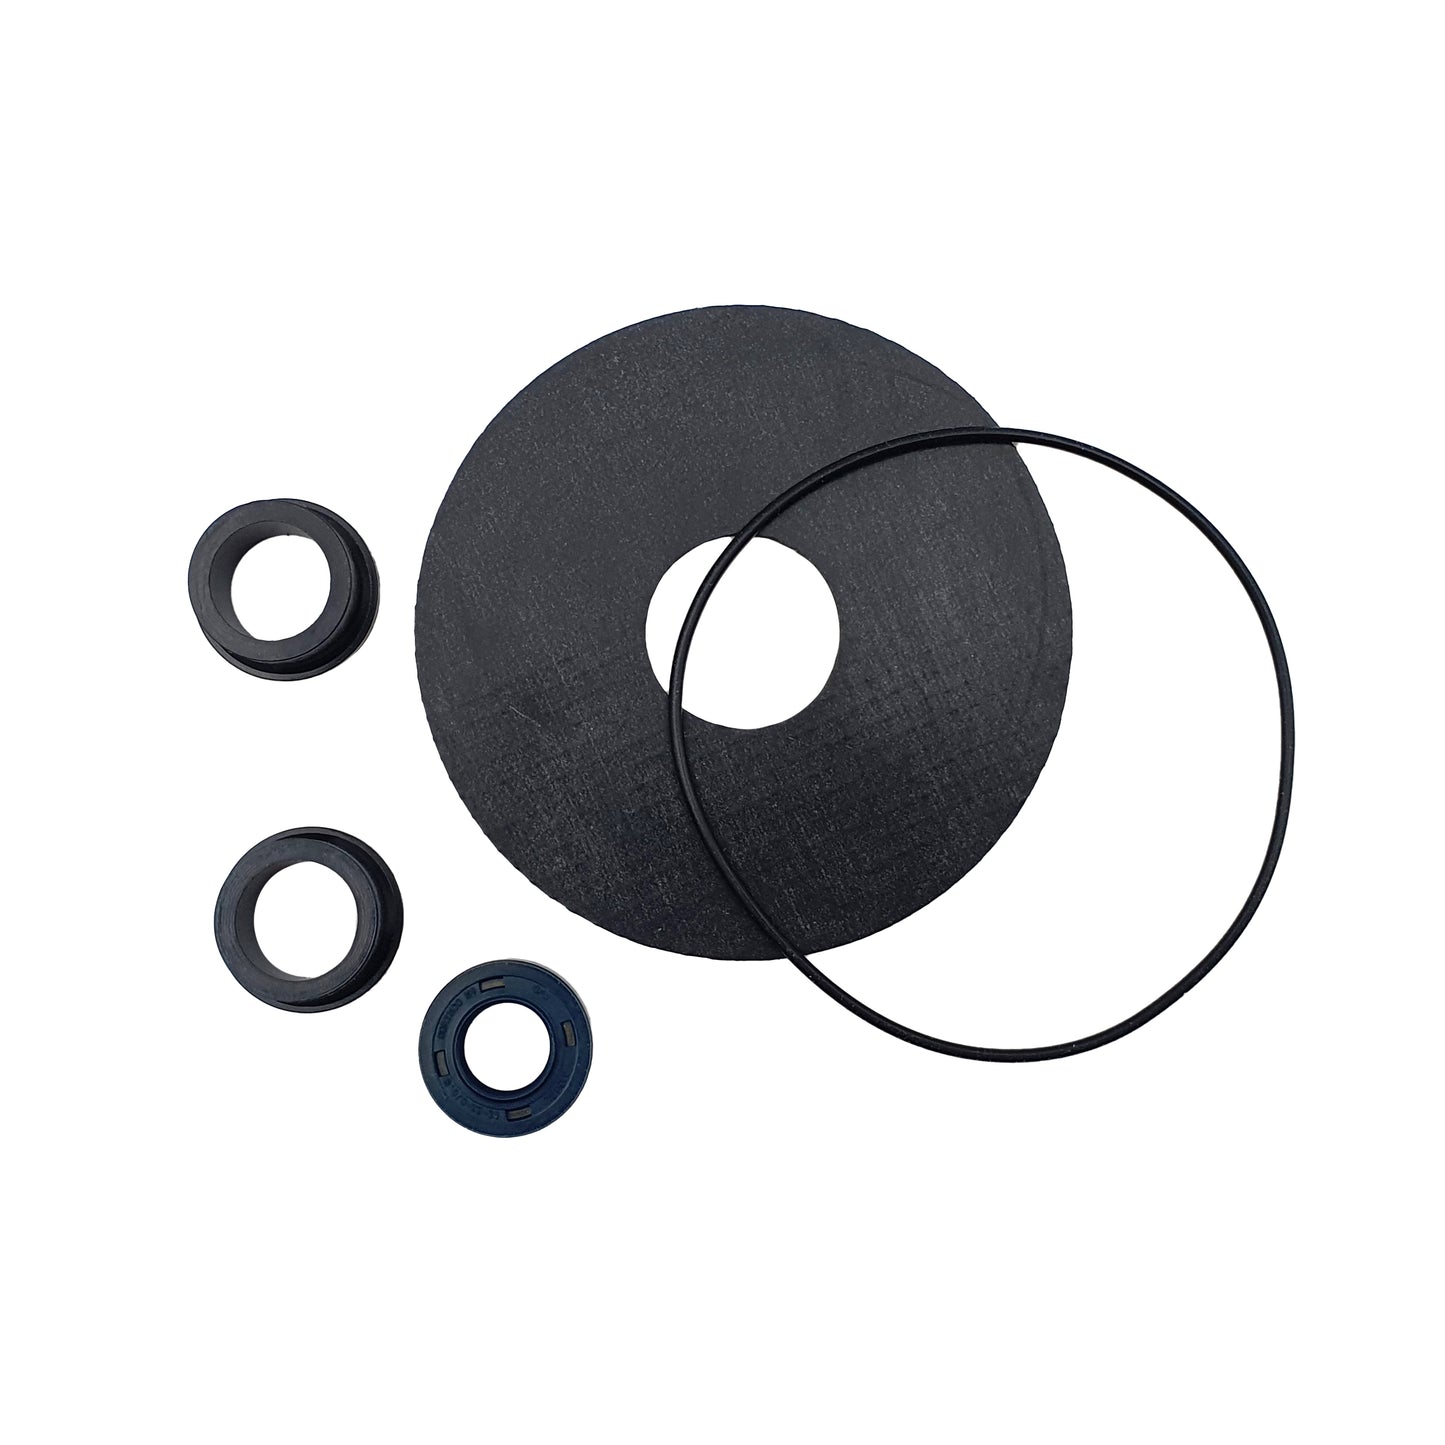 Pump Part Rover Seal Kit to Suit BE-M 20